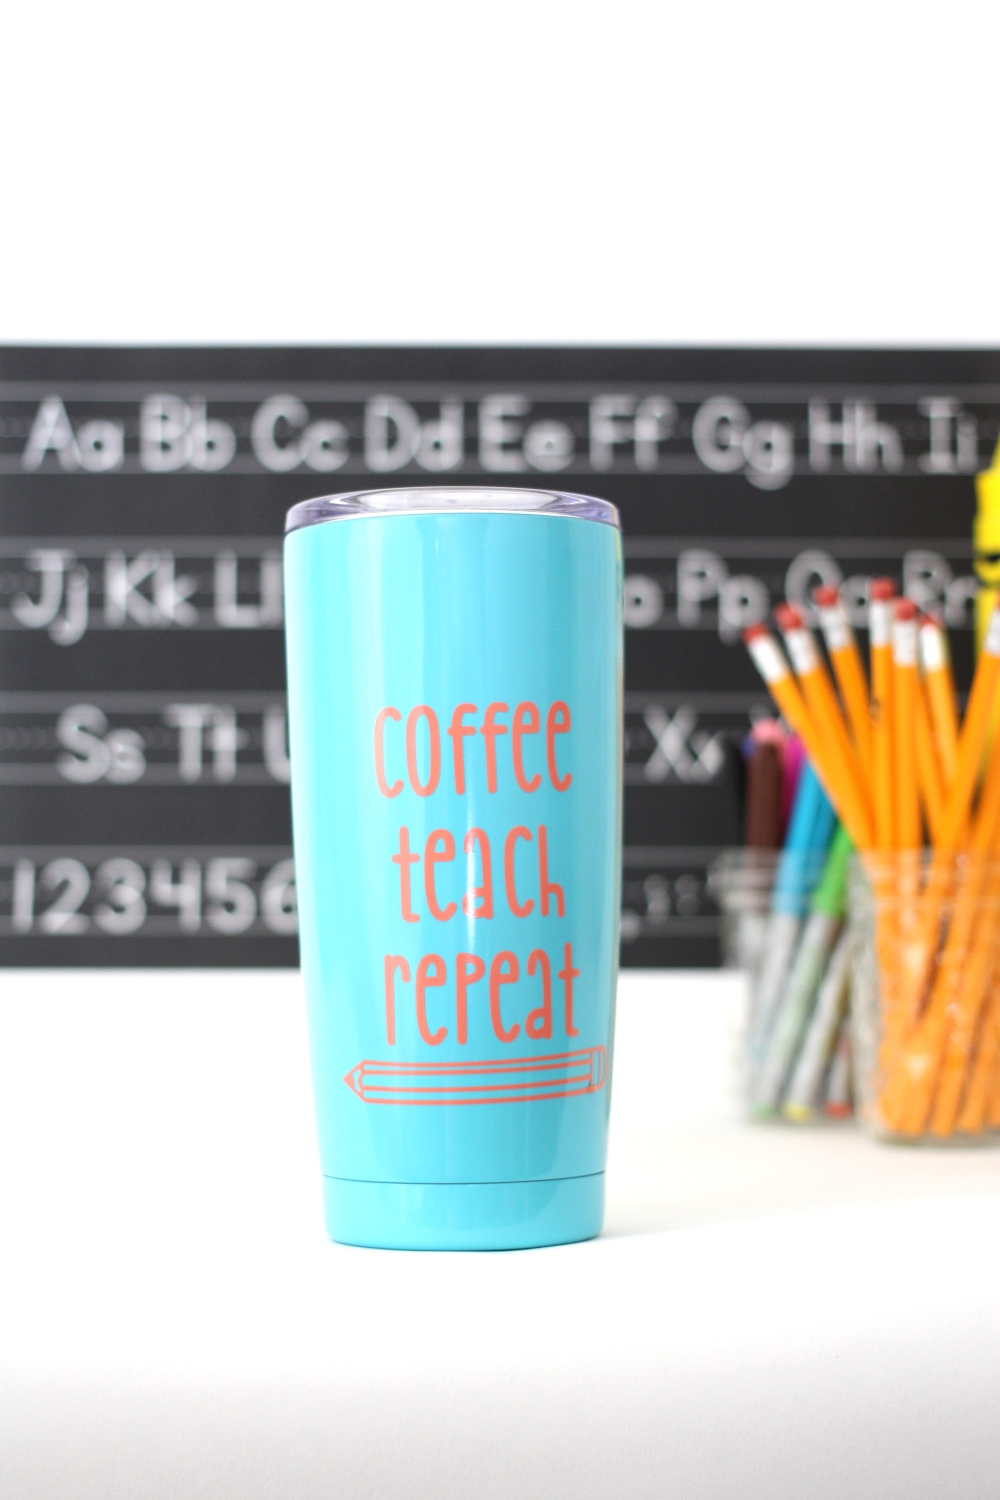 Check out this teacher tumbler that would be perfect for a back to school gift for your child's teacher, or something you can make for yourself if you’re an educator. Coffee, teach, repeat from Polka Dotted Blue Jay with Craftables.